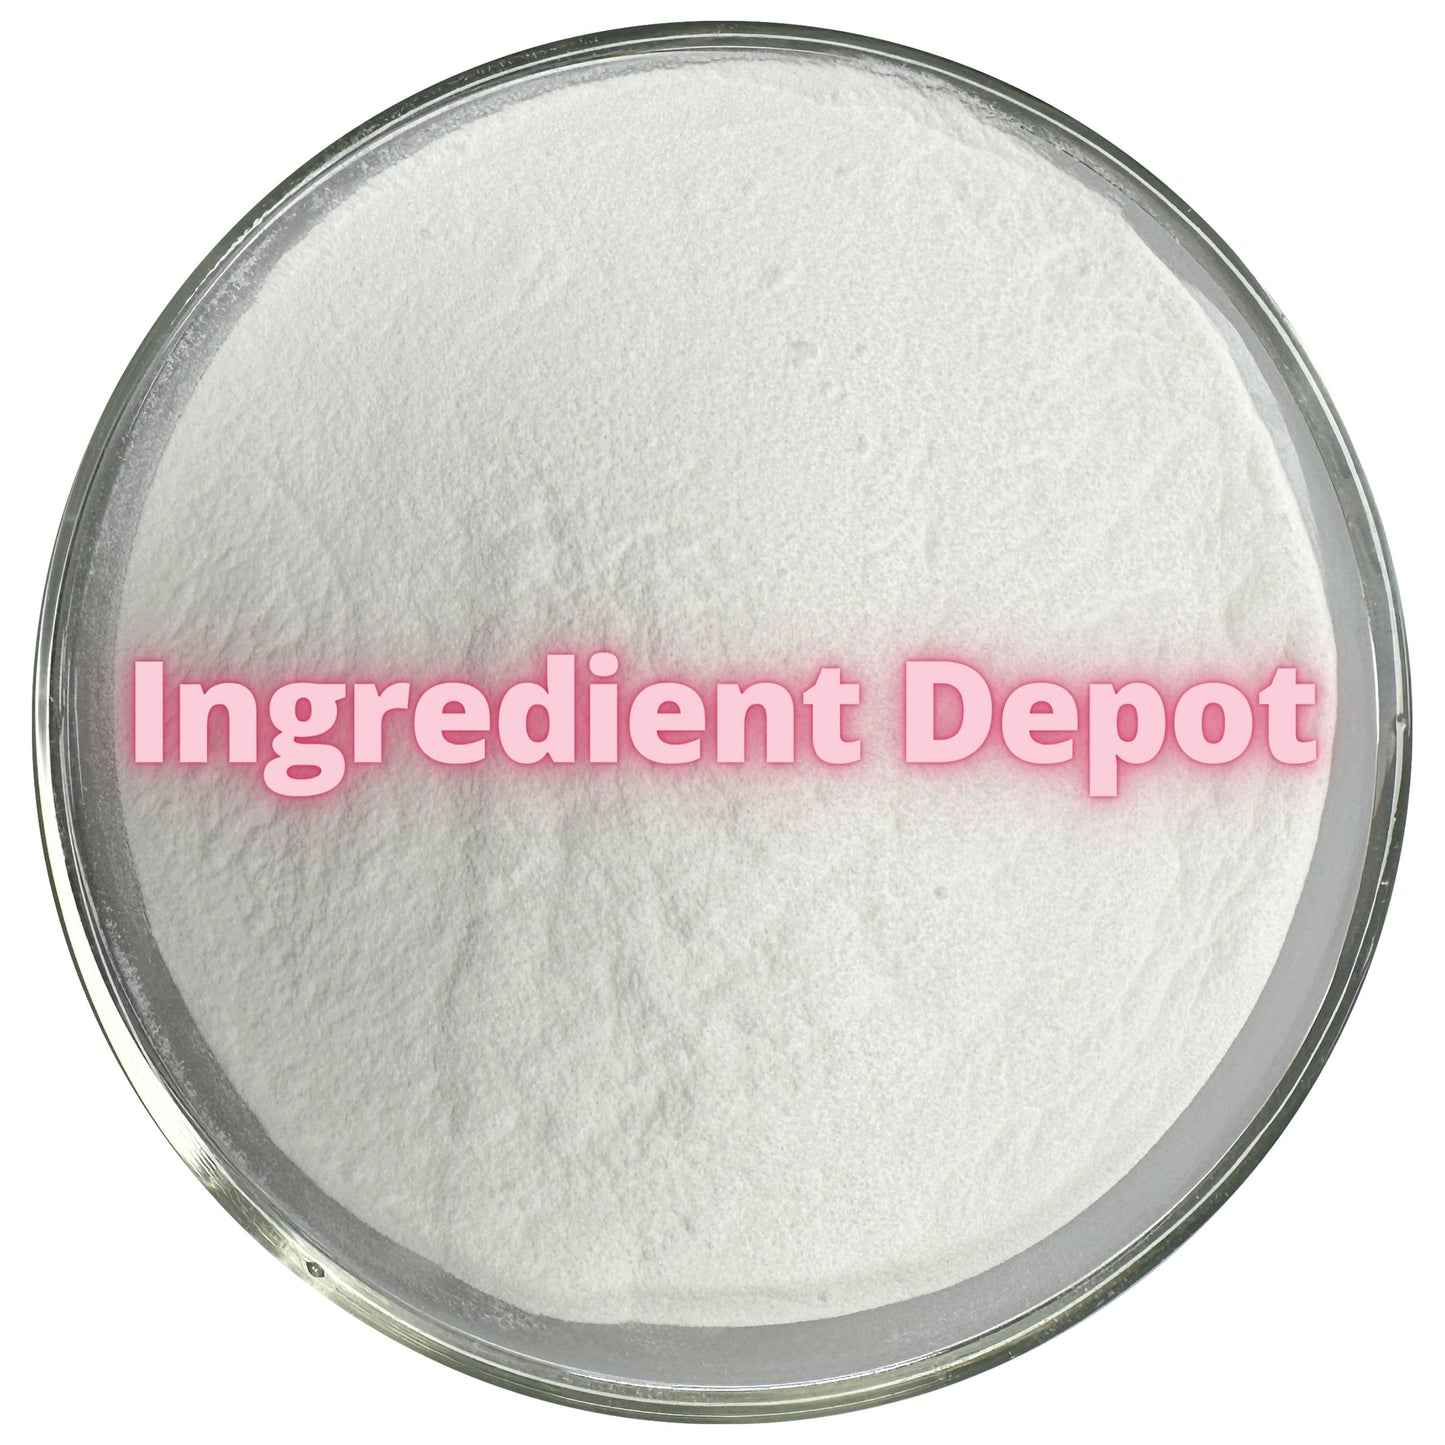 SMCC 50 Silicified Microcrystalline Cellulose - USP/NF Grade 10 kgs - Ingredient Depot